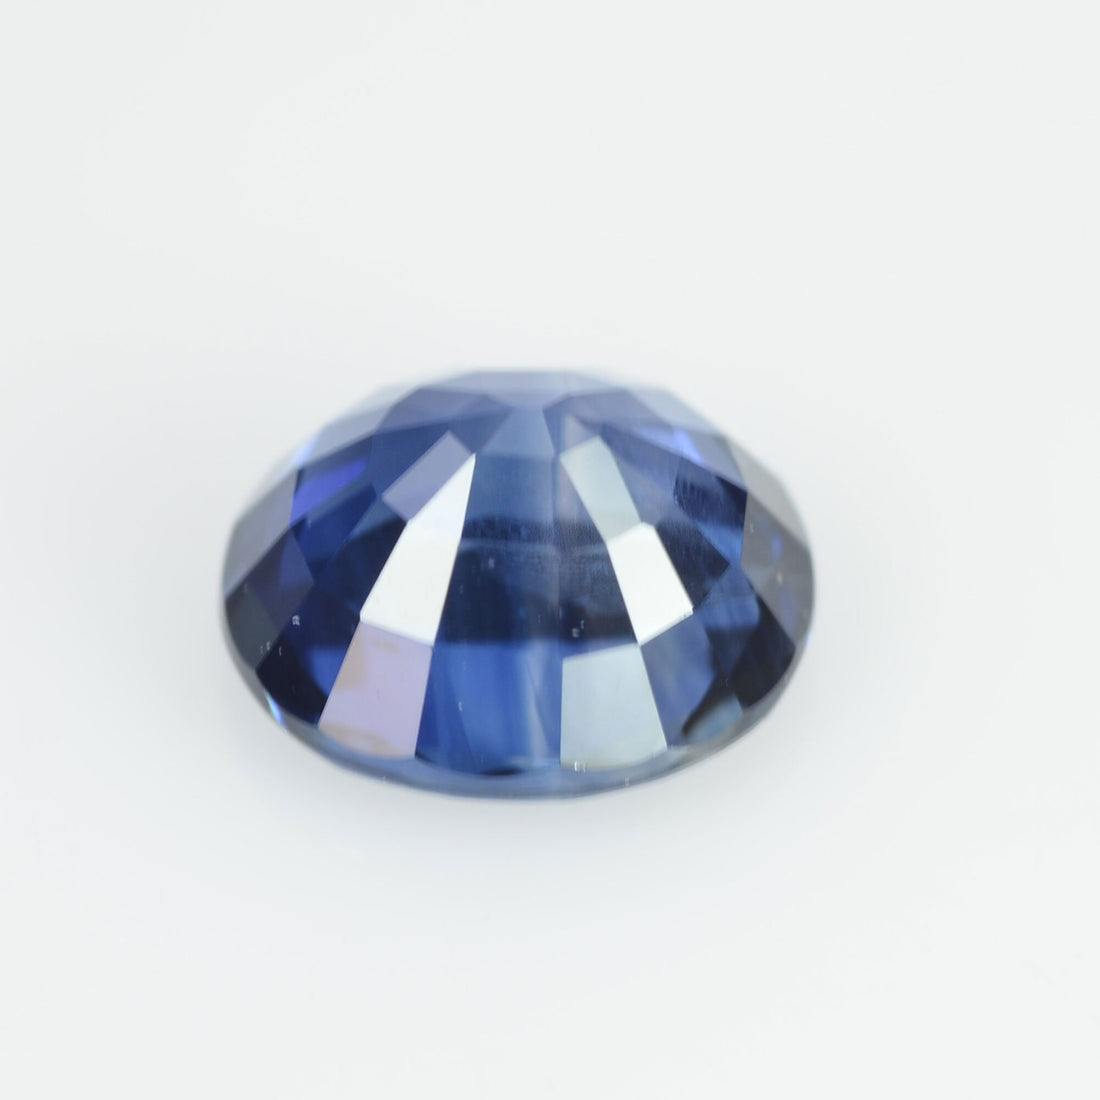 1.37 cts Natural Blue Sapphire Loose Gemstone Oval Cut